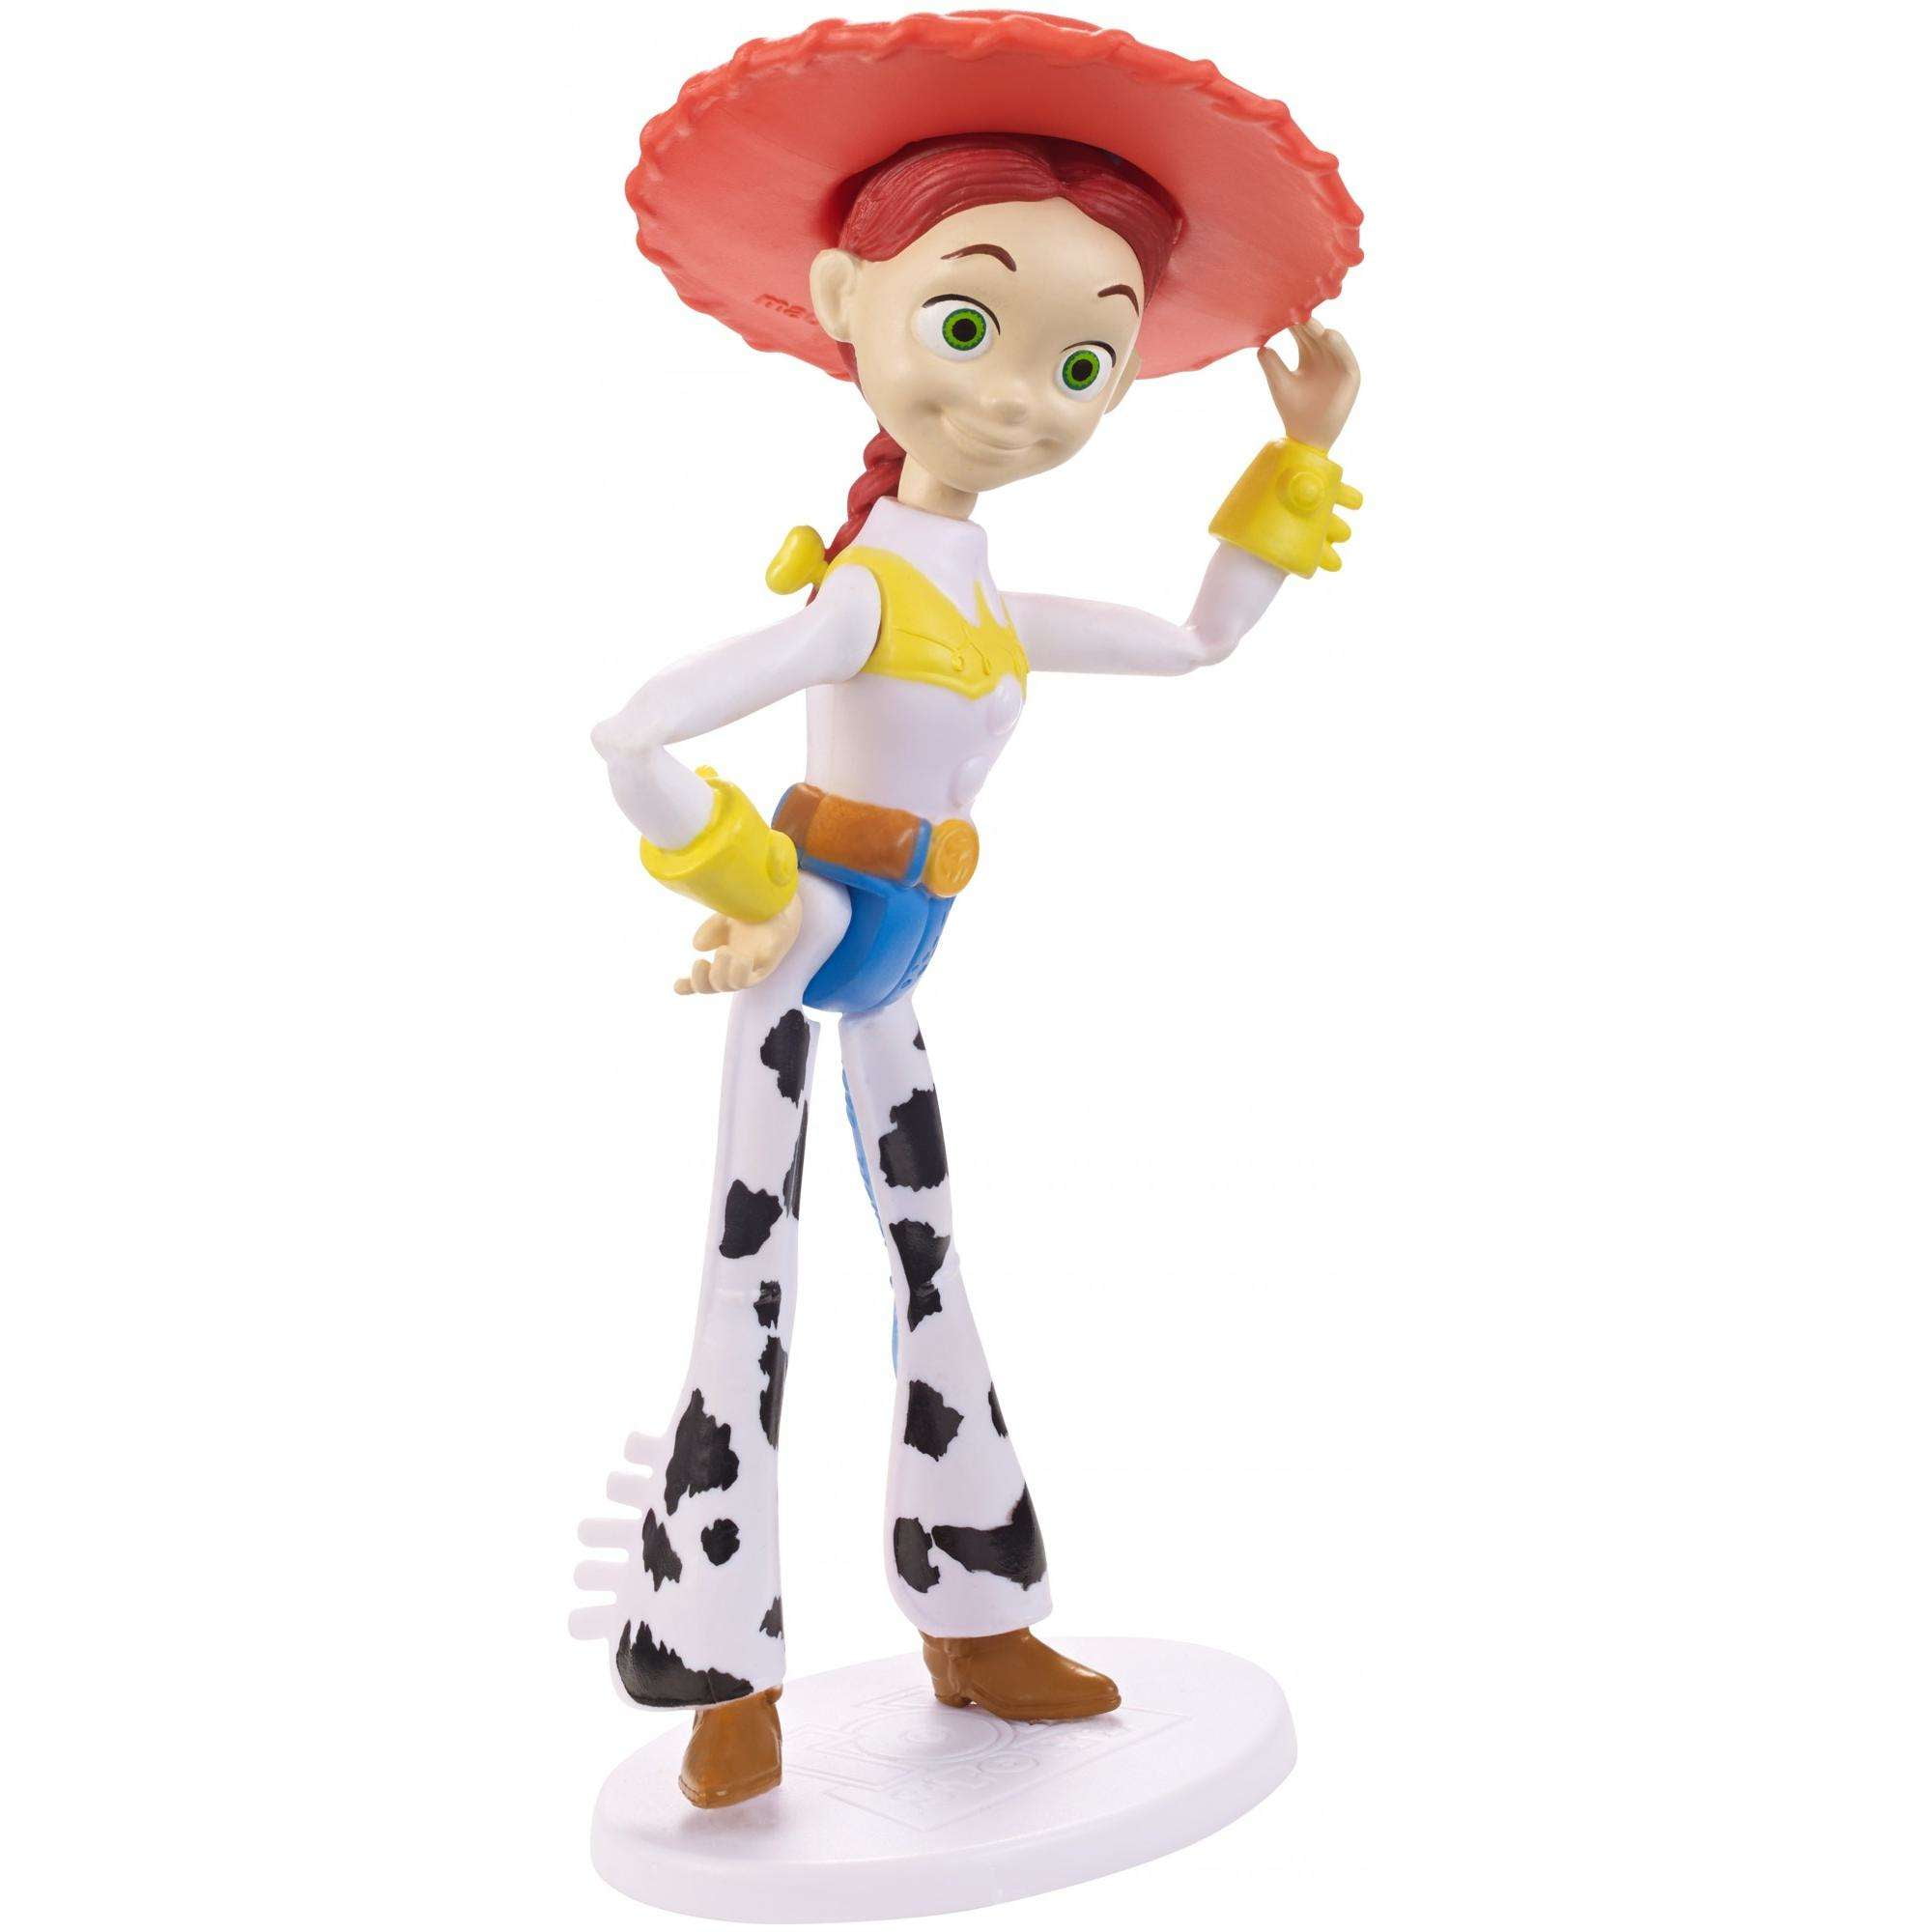 Disney Action Figure - Jessie - Toy Story 4-Action-F2567